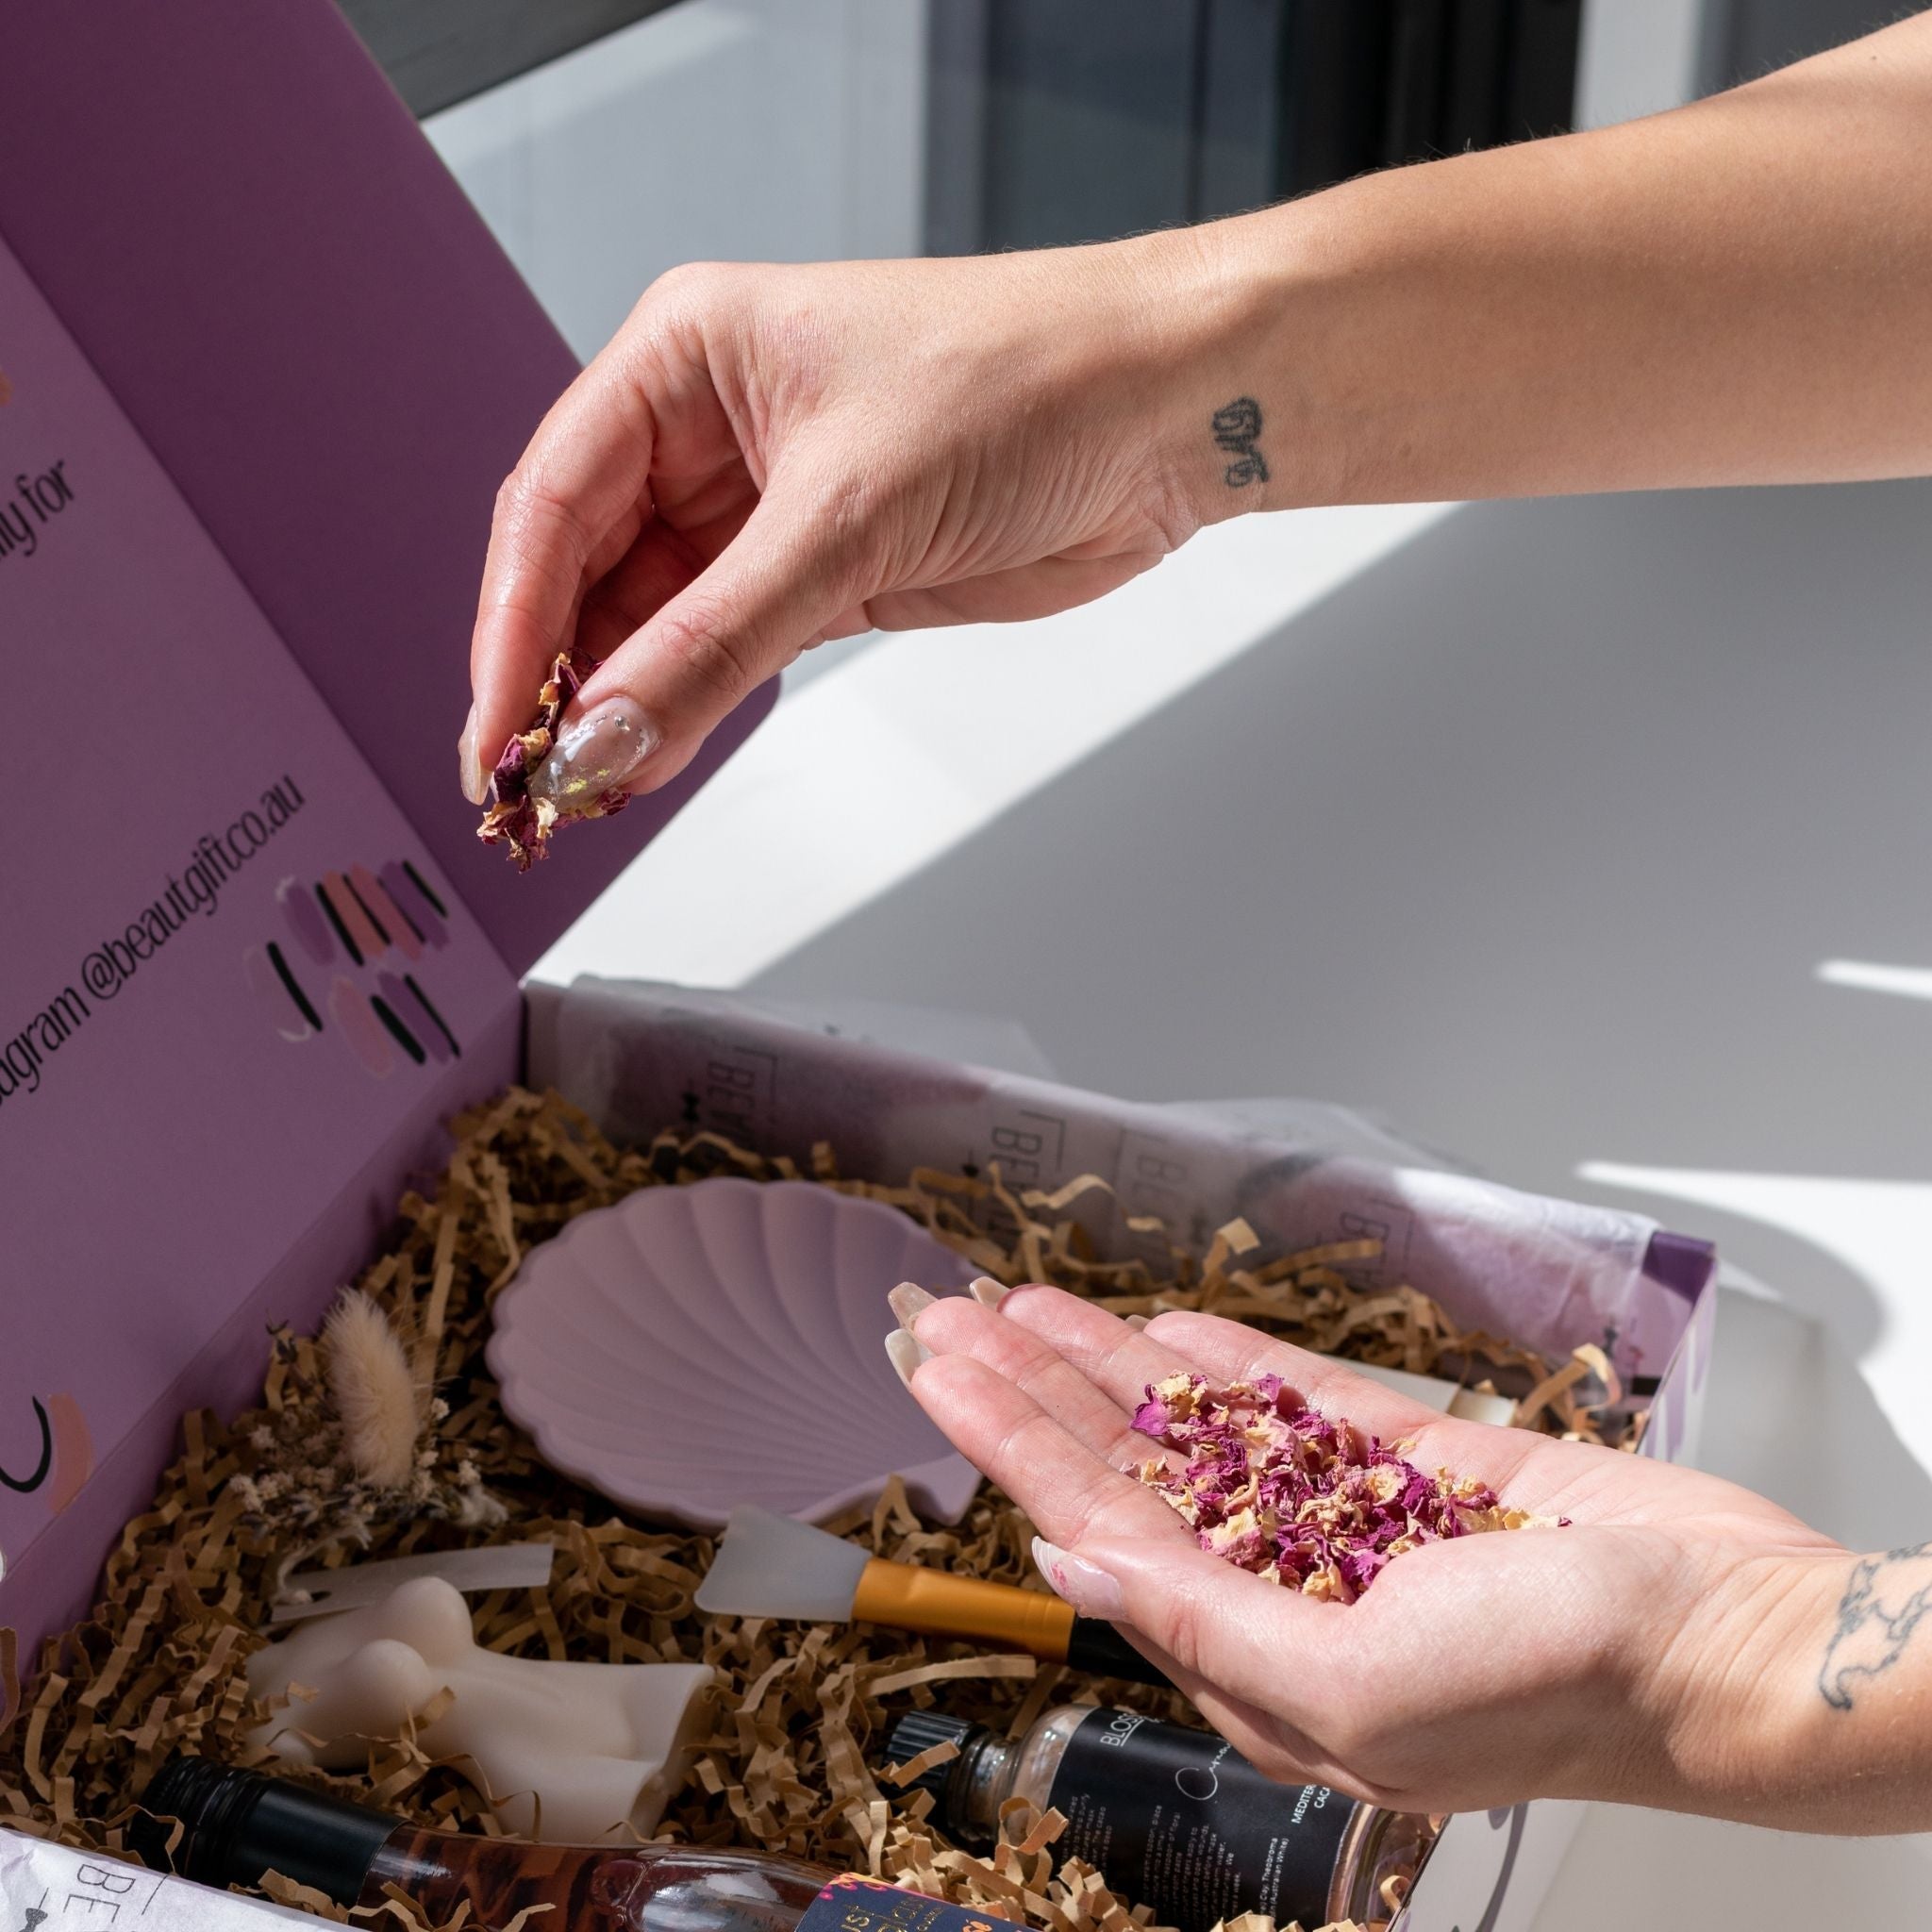 sprinkling flower petals to decorate a beaut box